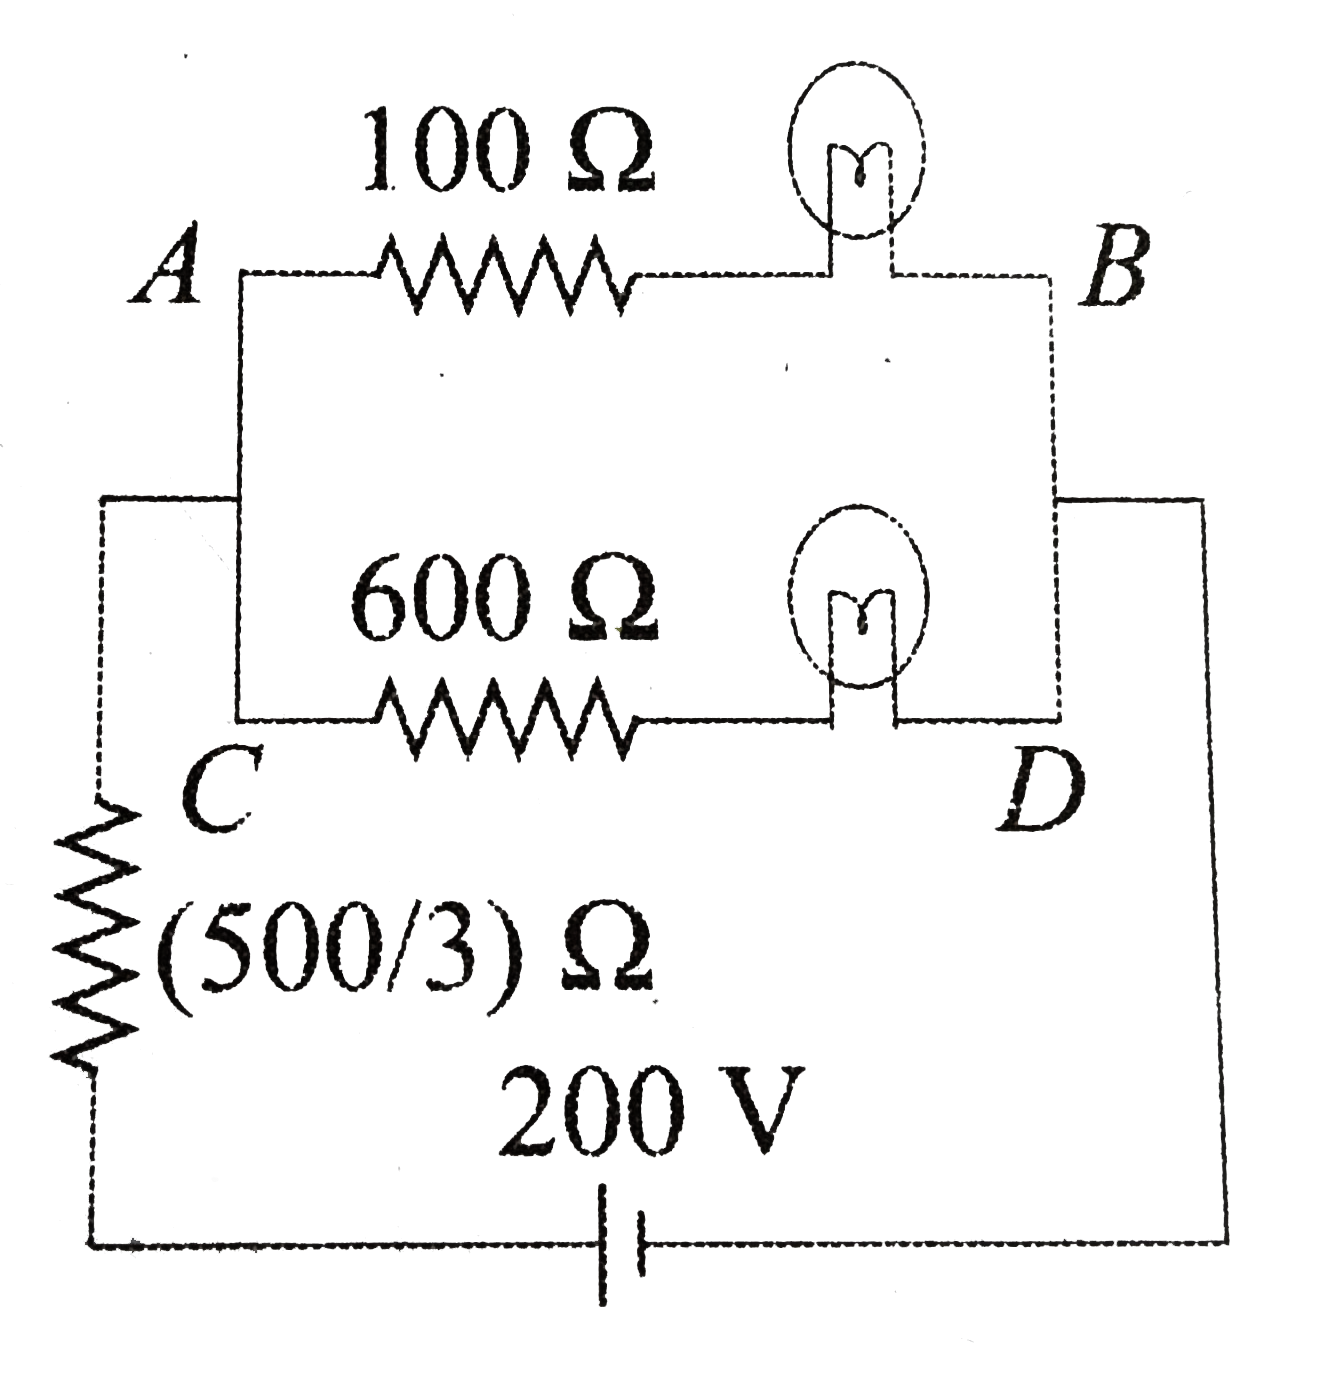 Two bulbs 25W, 100 V (upper bulb in figure) and 100 W, 200 V (lower bulb in figure) are connected in the circuit as shown in figure. Choose the correct answer.